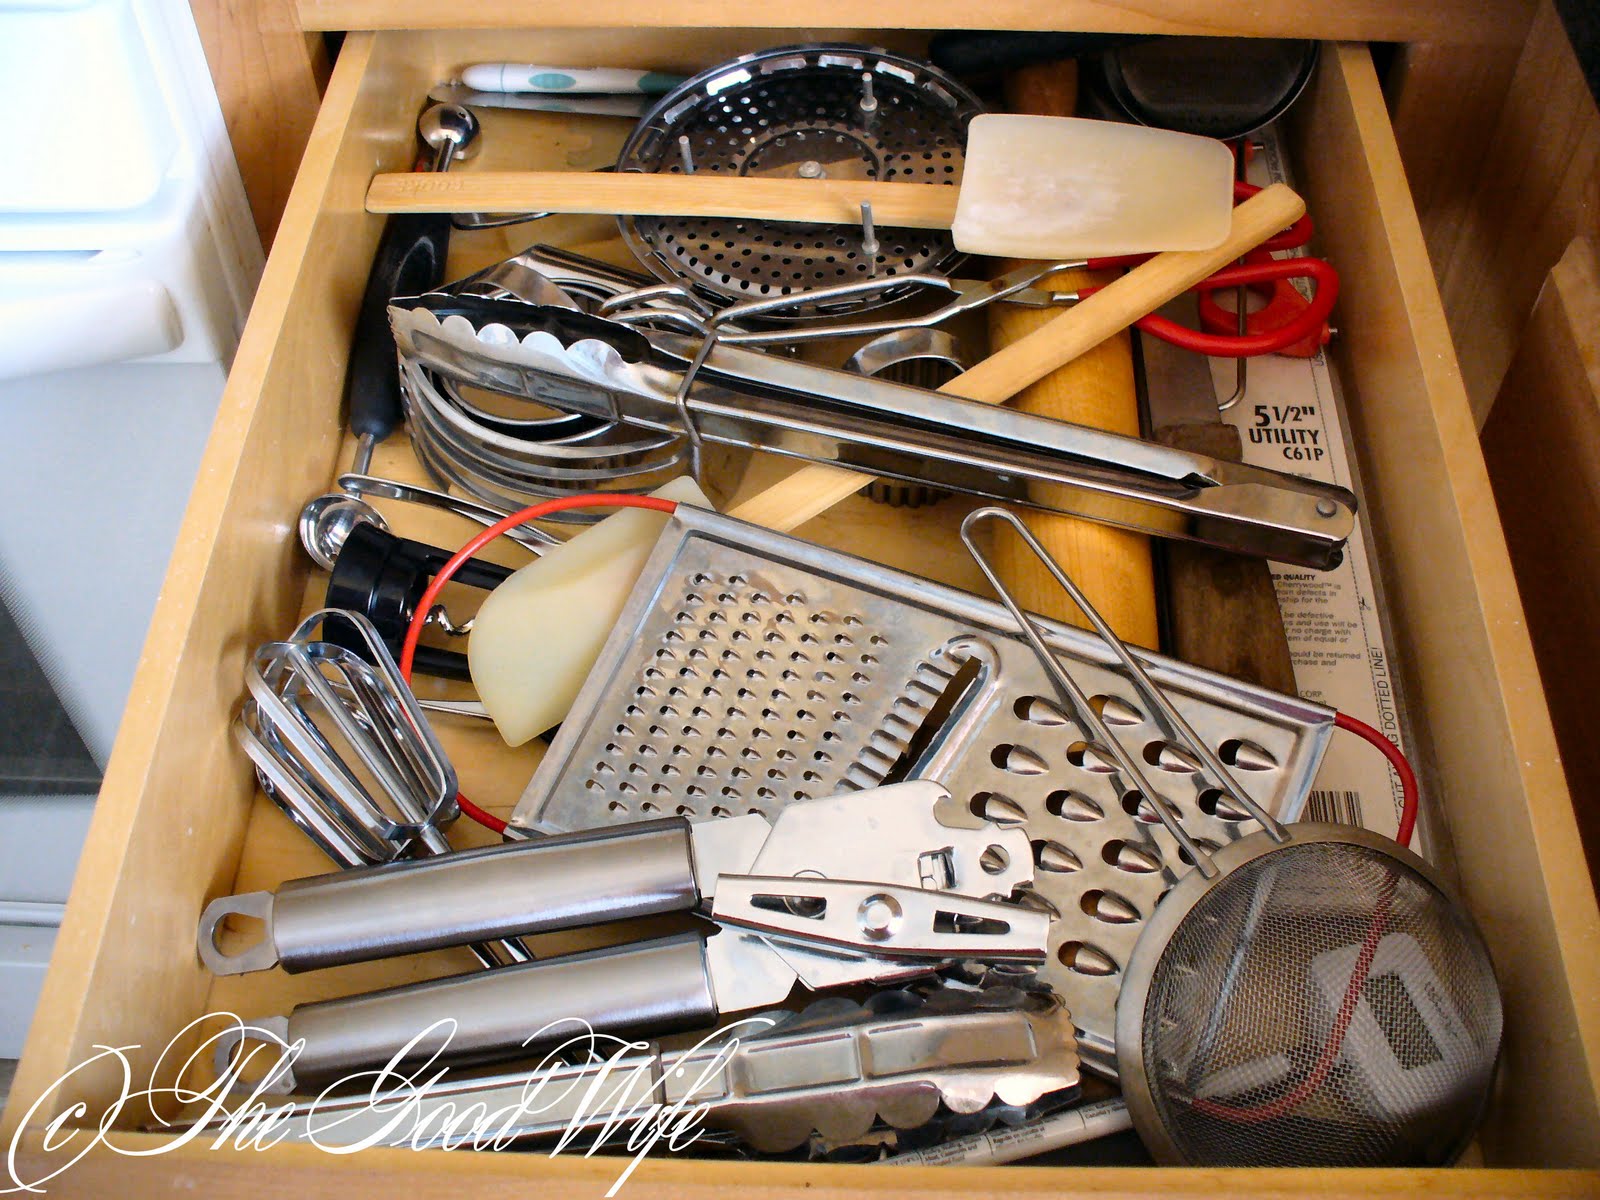 The Good Wife: The Organized Kitchen, Part 3 - The Utensil Drawer